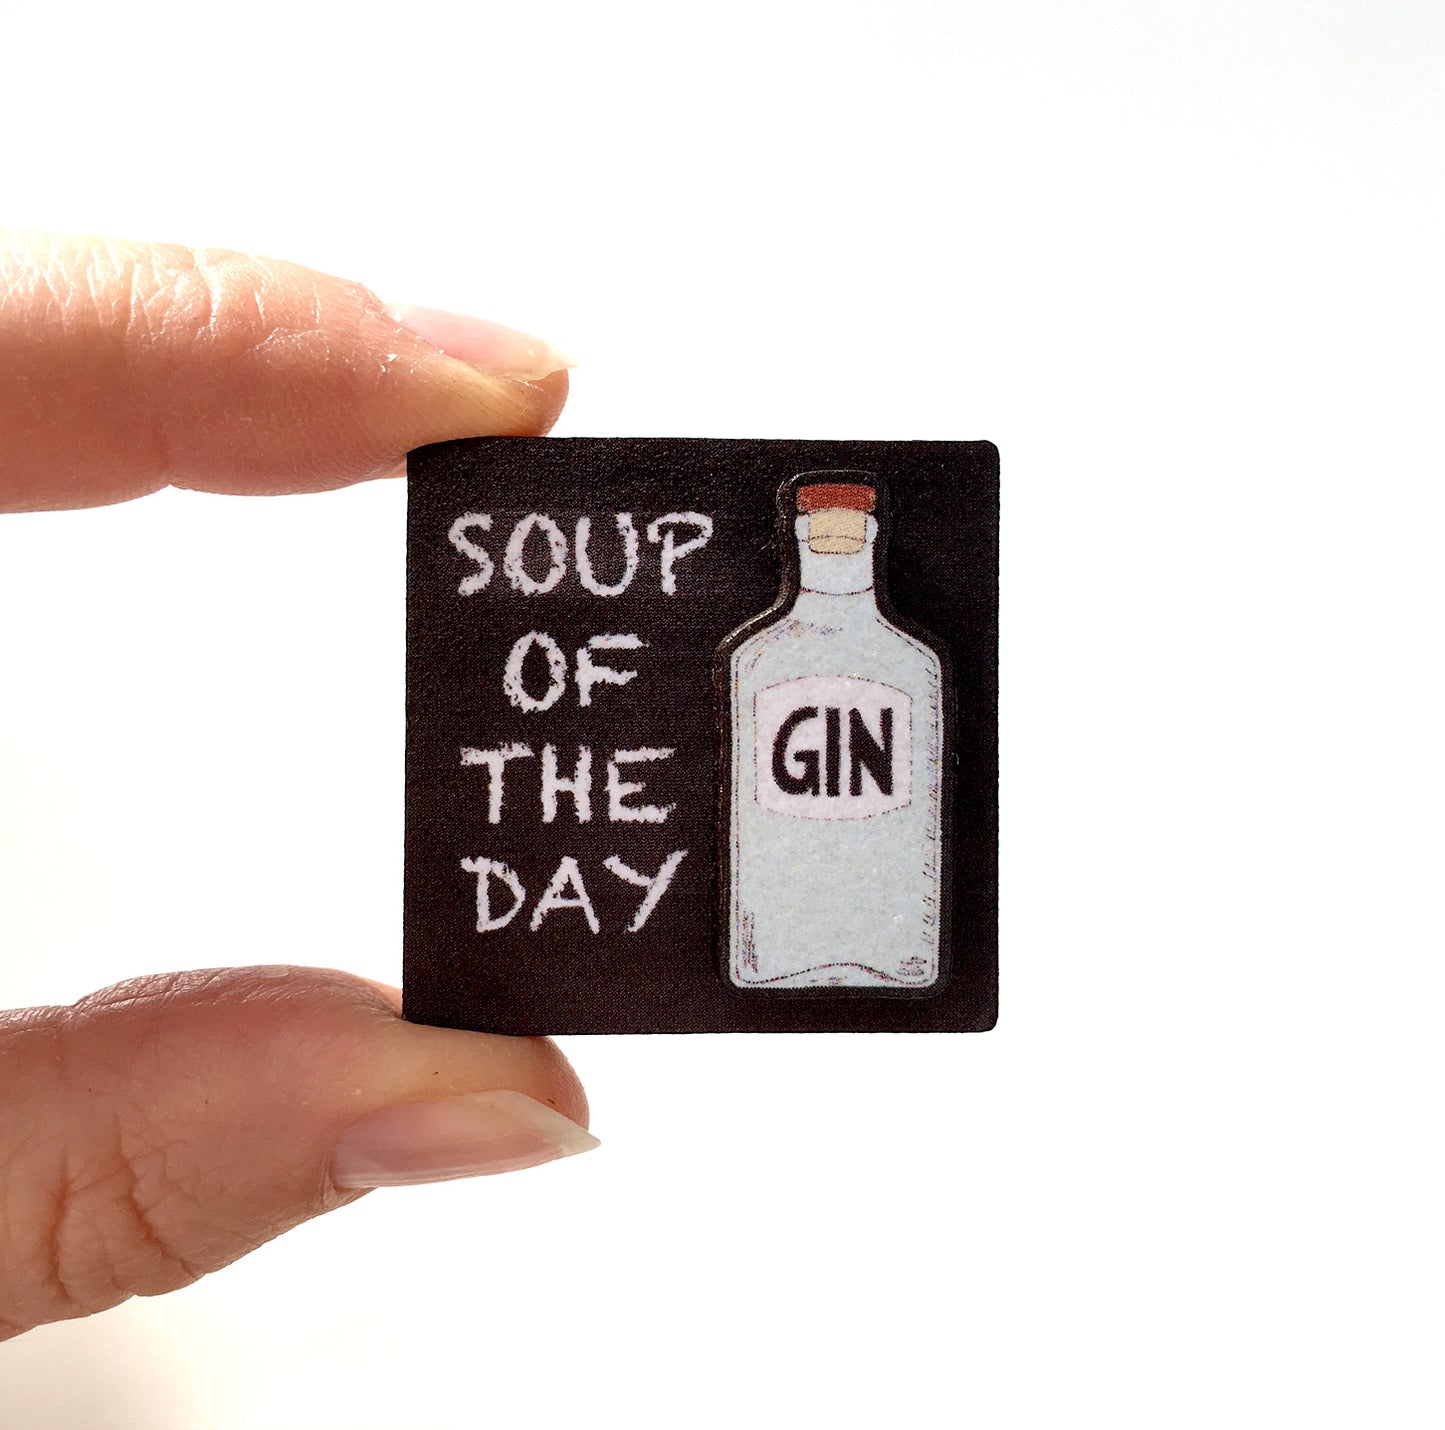 Quirky gin brooch - Gin lover gift